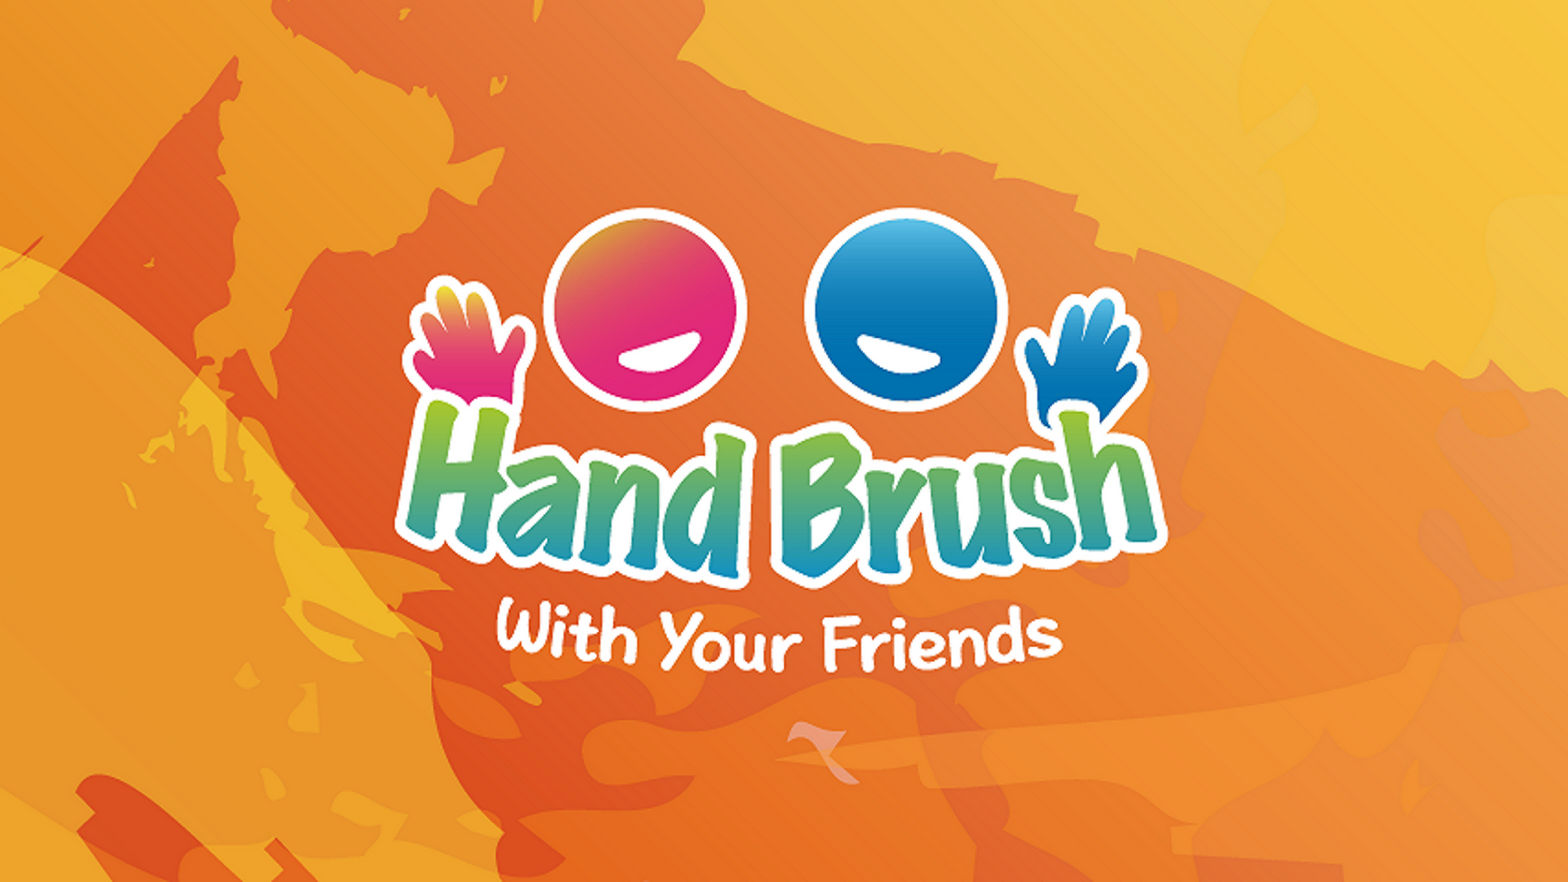 Hand Brush “with your friend”